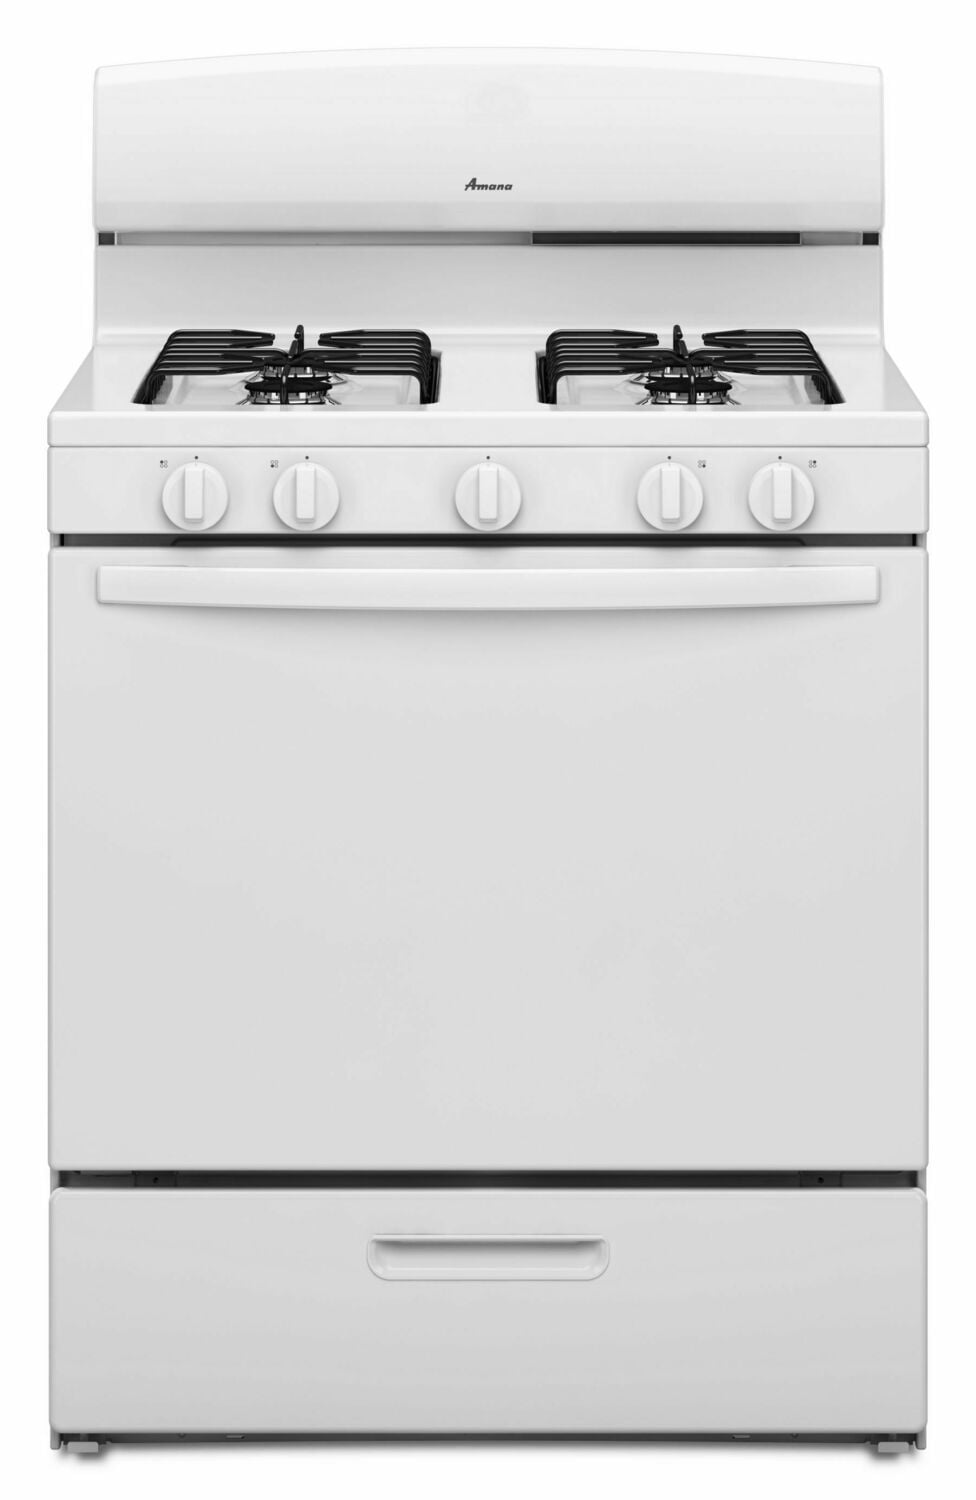 Amana AGR4230BAW 30-Inch Gas Range With Easyaccess Broiler Door - White